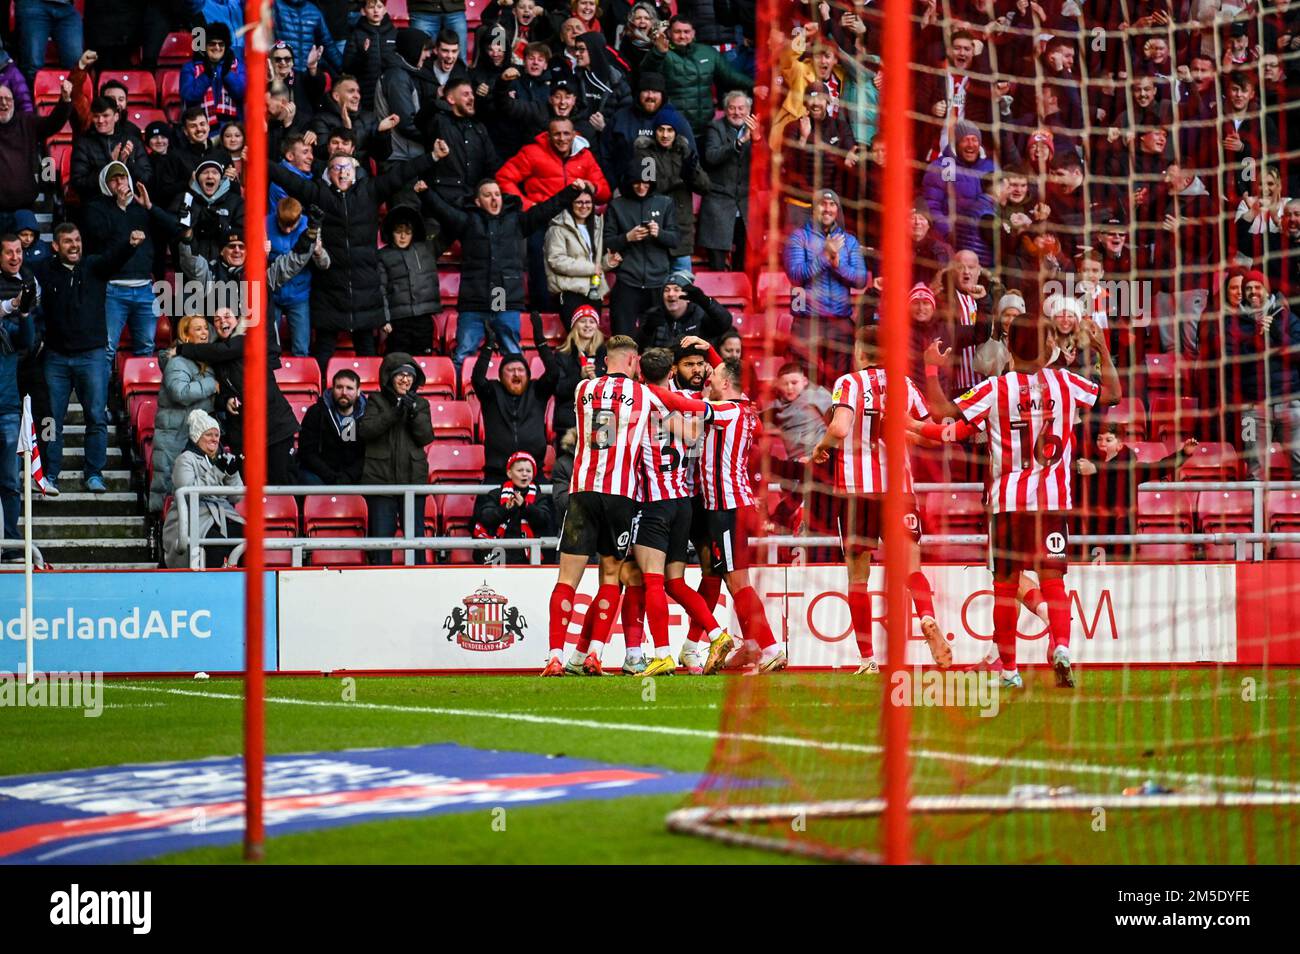 Sunderland AFC players celebrate Ellis Simms' stoppage time winner against Blackburn Rovers in the EFL Championship. Stock Photo